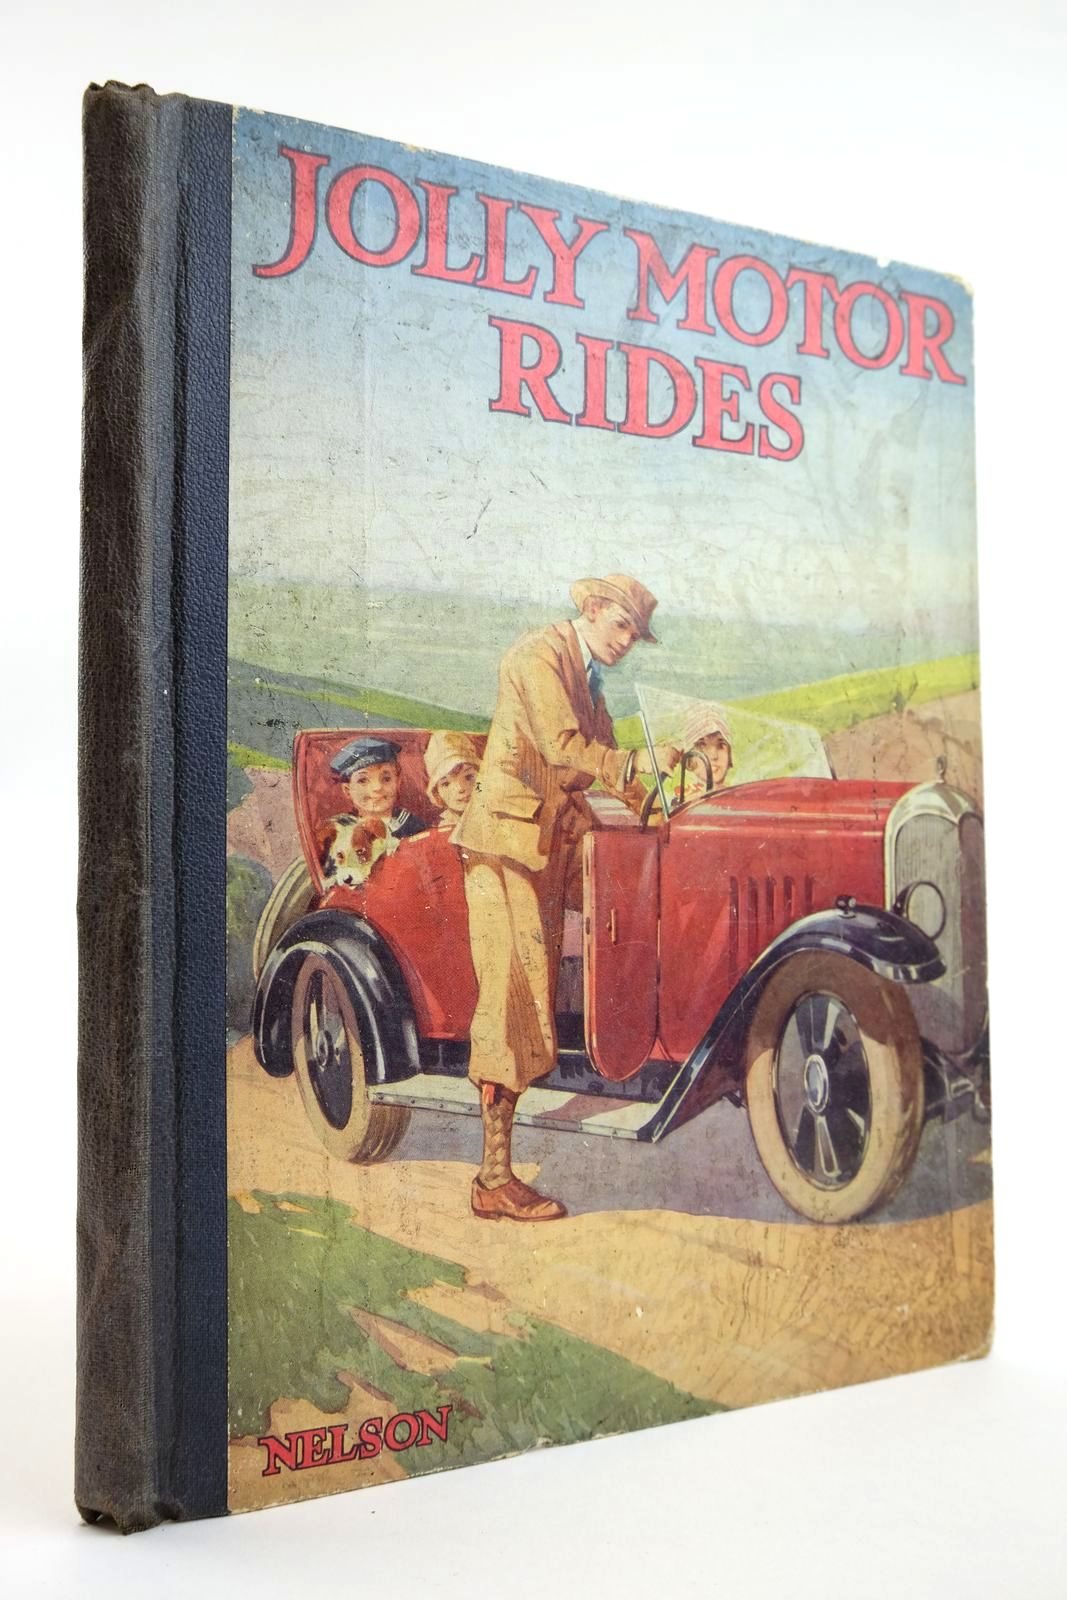 Photo of JOLLY MOTOR RIDES illustrated by Kennedy, A.E. published by Thomas Nelson and Sons Ltd. (STOCK CODE: 2133453)  for sale by Stella & Rose's Books